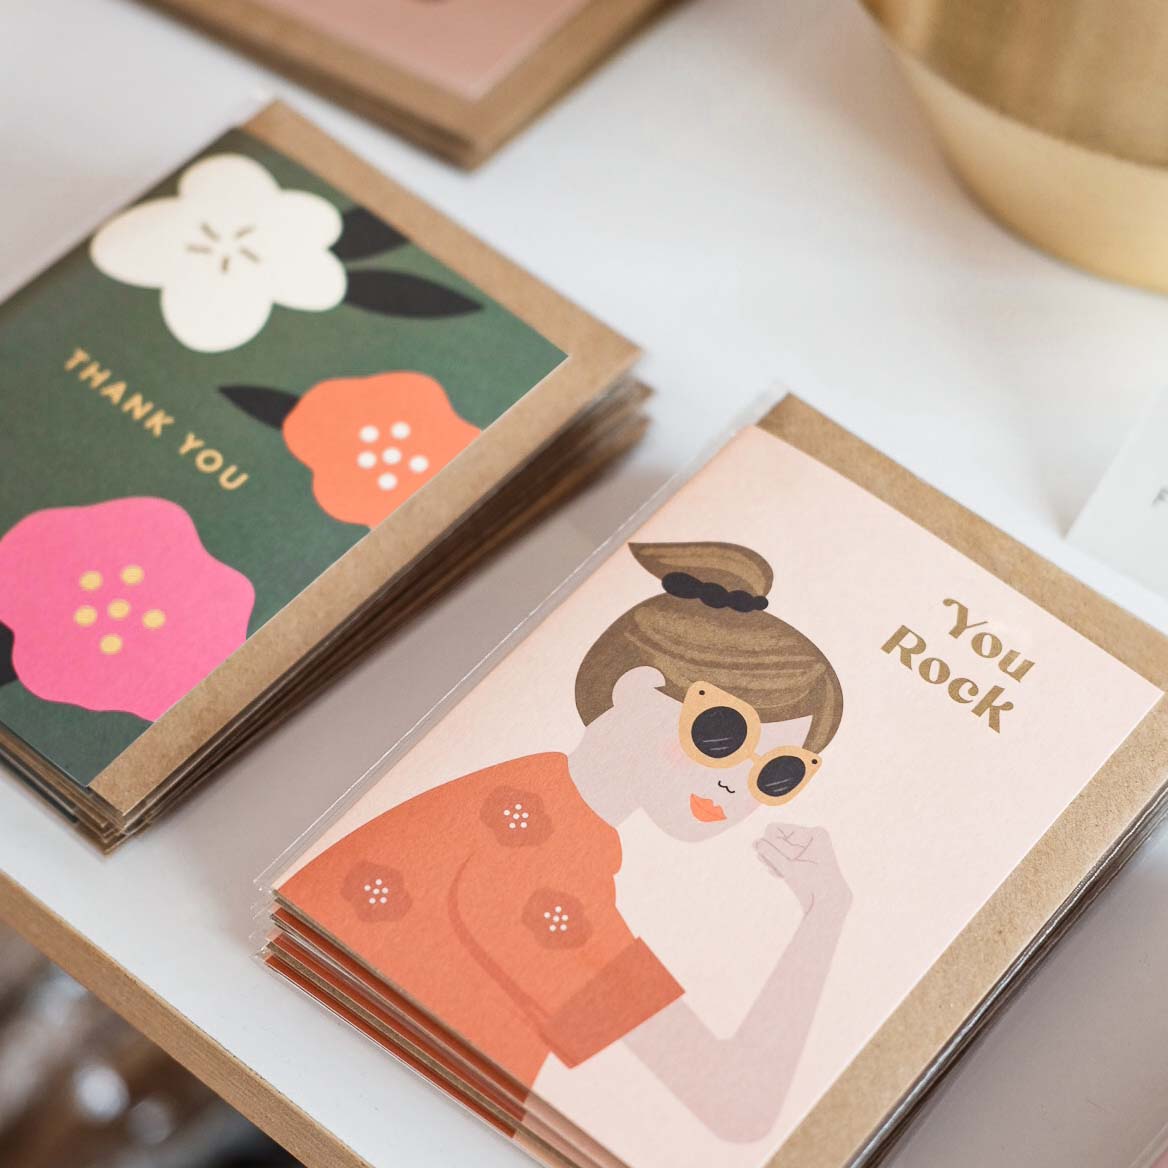 Here's why our Greeting cards are worth buying